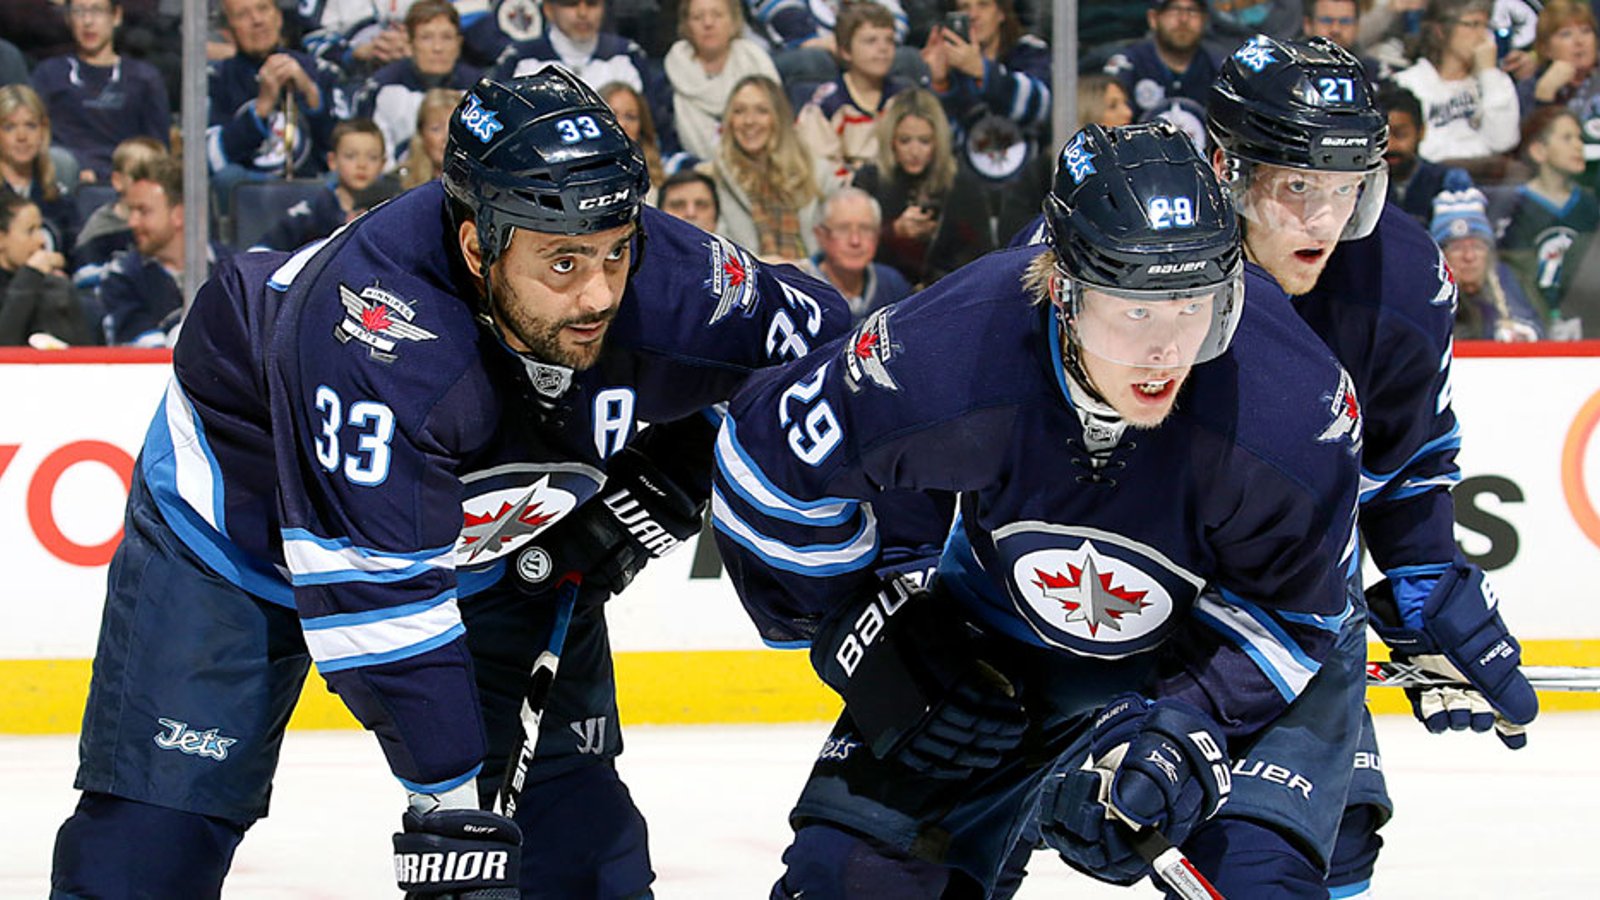 Laine throws Byfuglien under the bus after latest report